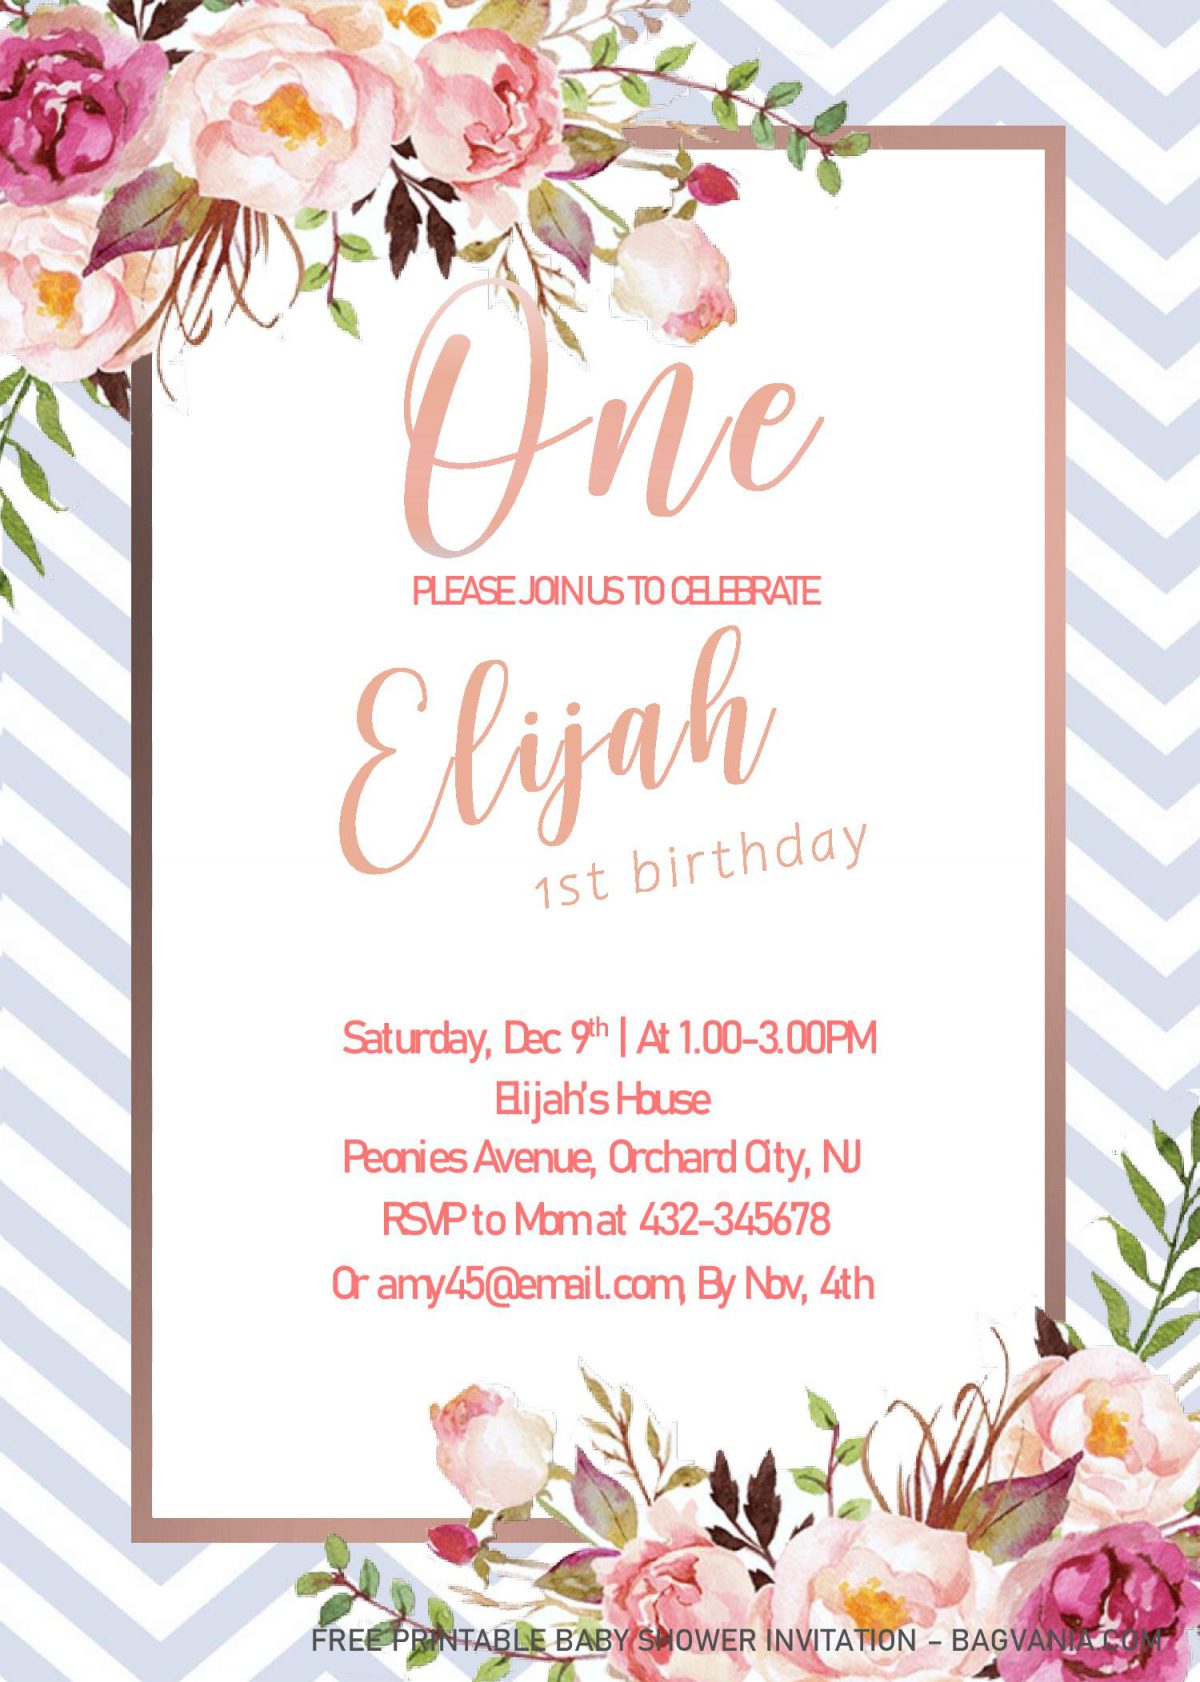 Blush Pink 1st Birthday Invitation Templates - Editable With MS Word and decorated with Metallic Text Frame